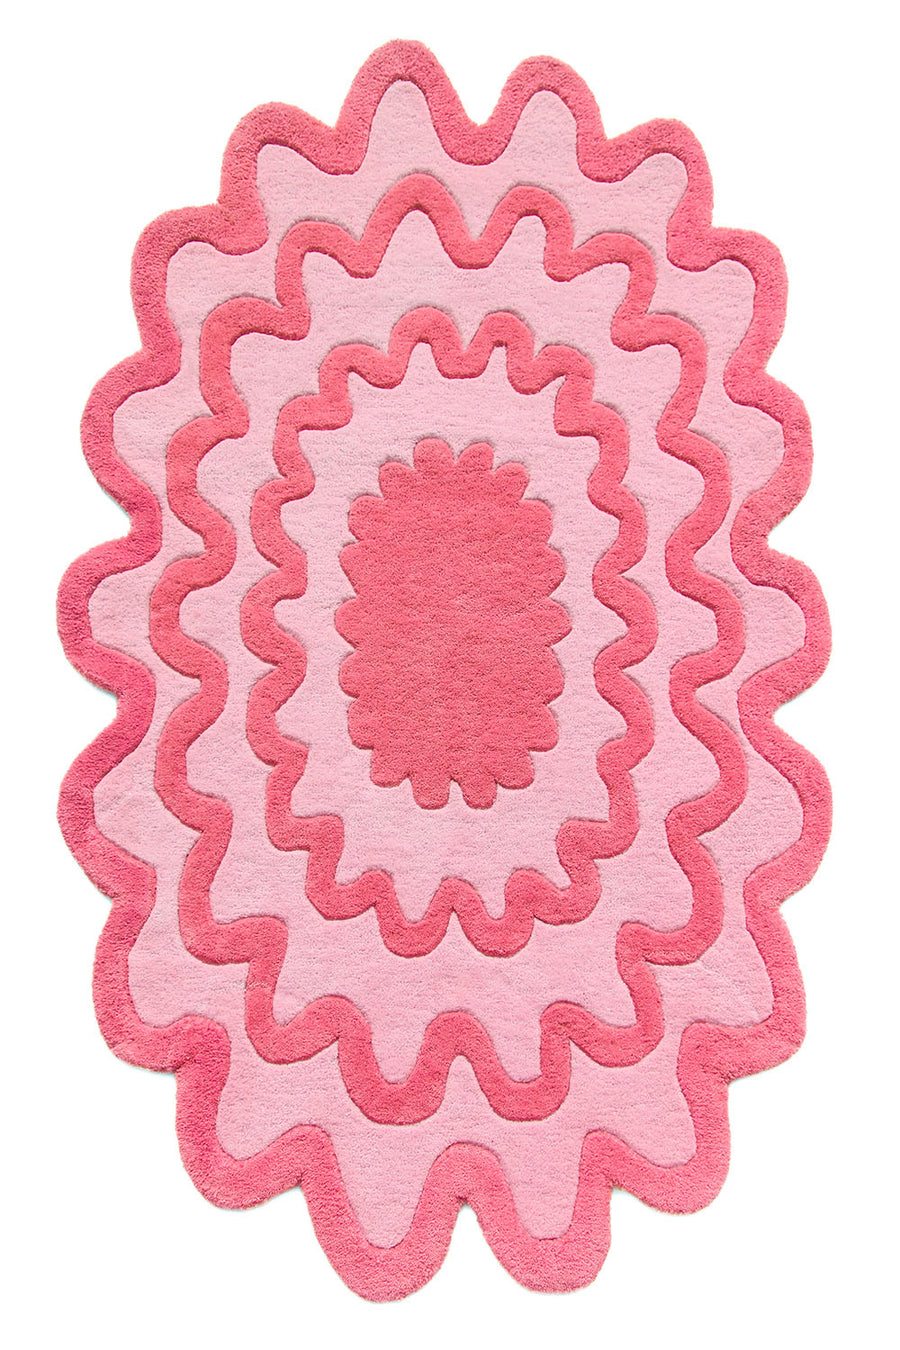 Burst Hand Tufted Wool Rug in Pink by Jubi